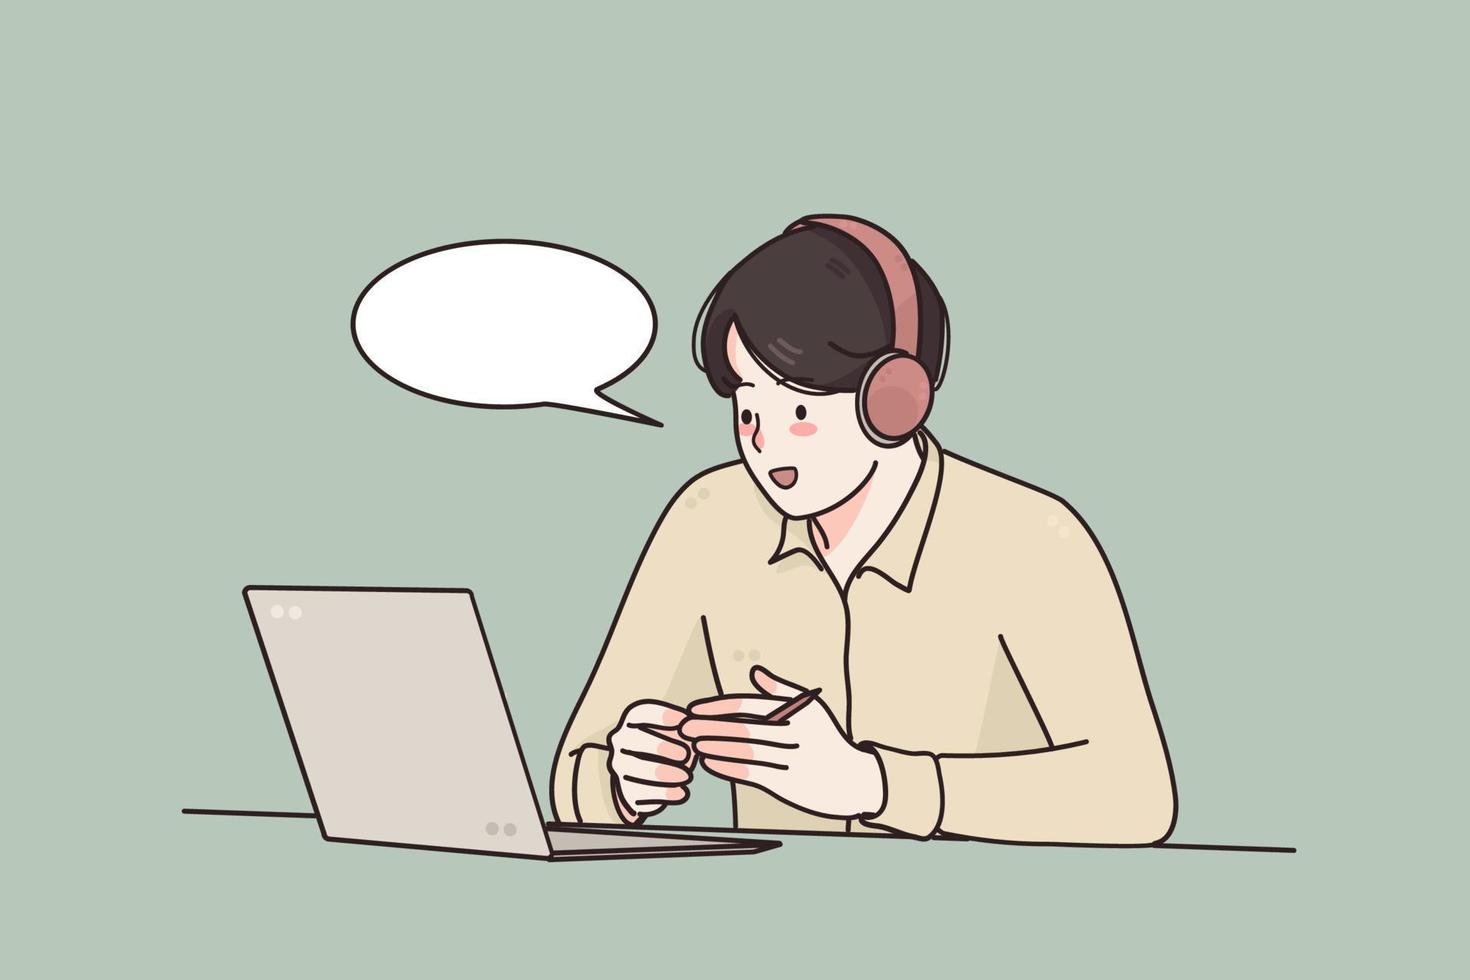 Video call, online class, remote communication concept. Focused young man worker in headphones having video call with clients on laptop or giving online educational class lecture vector illustration